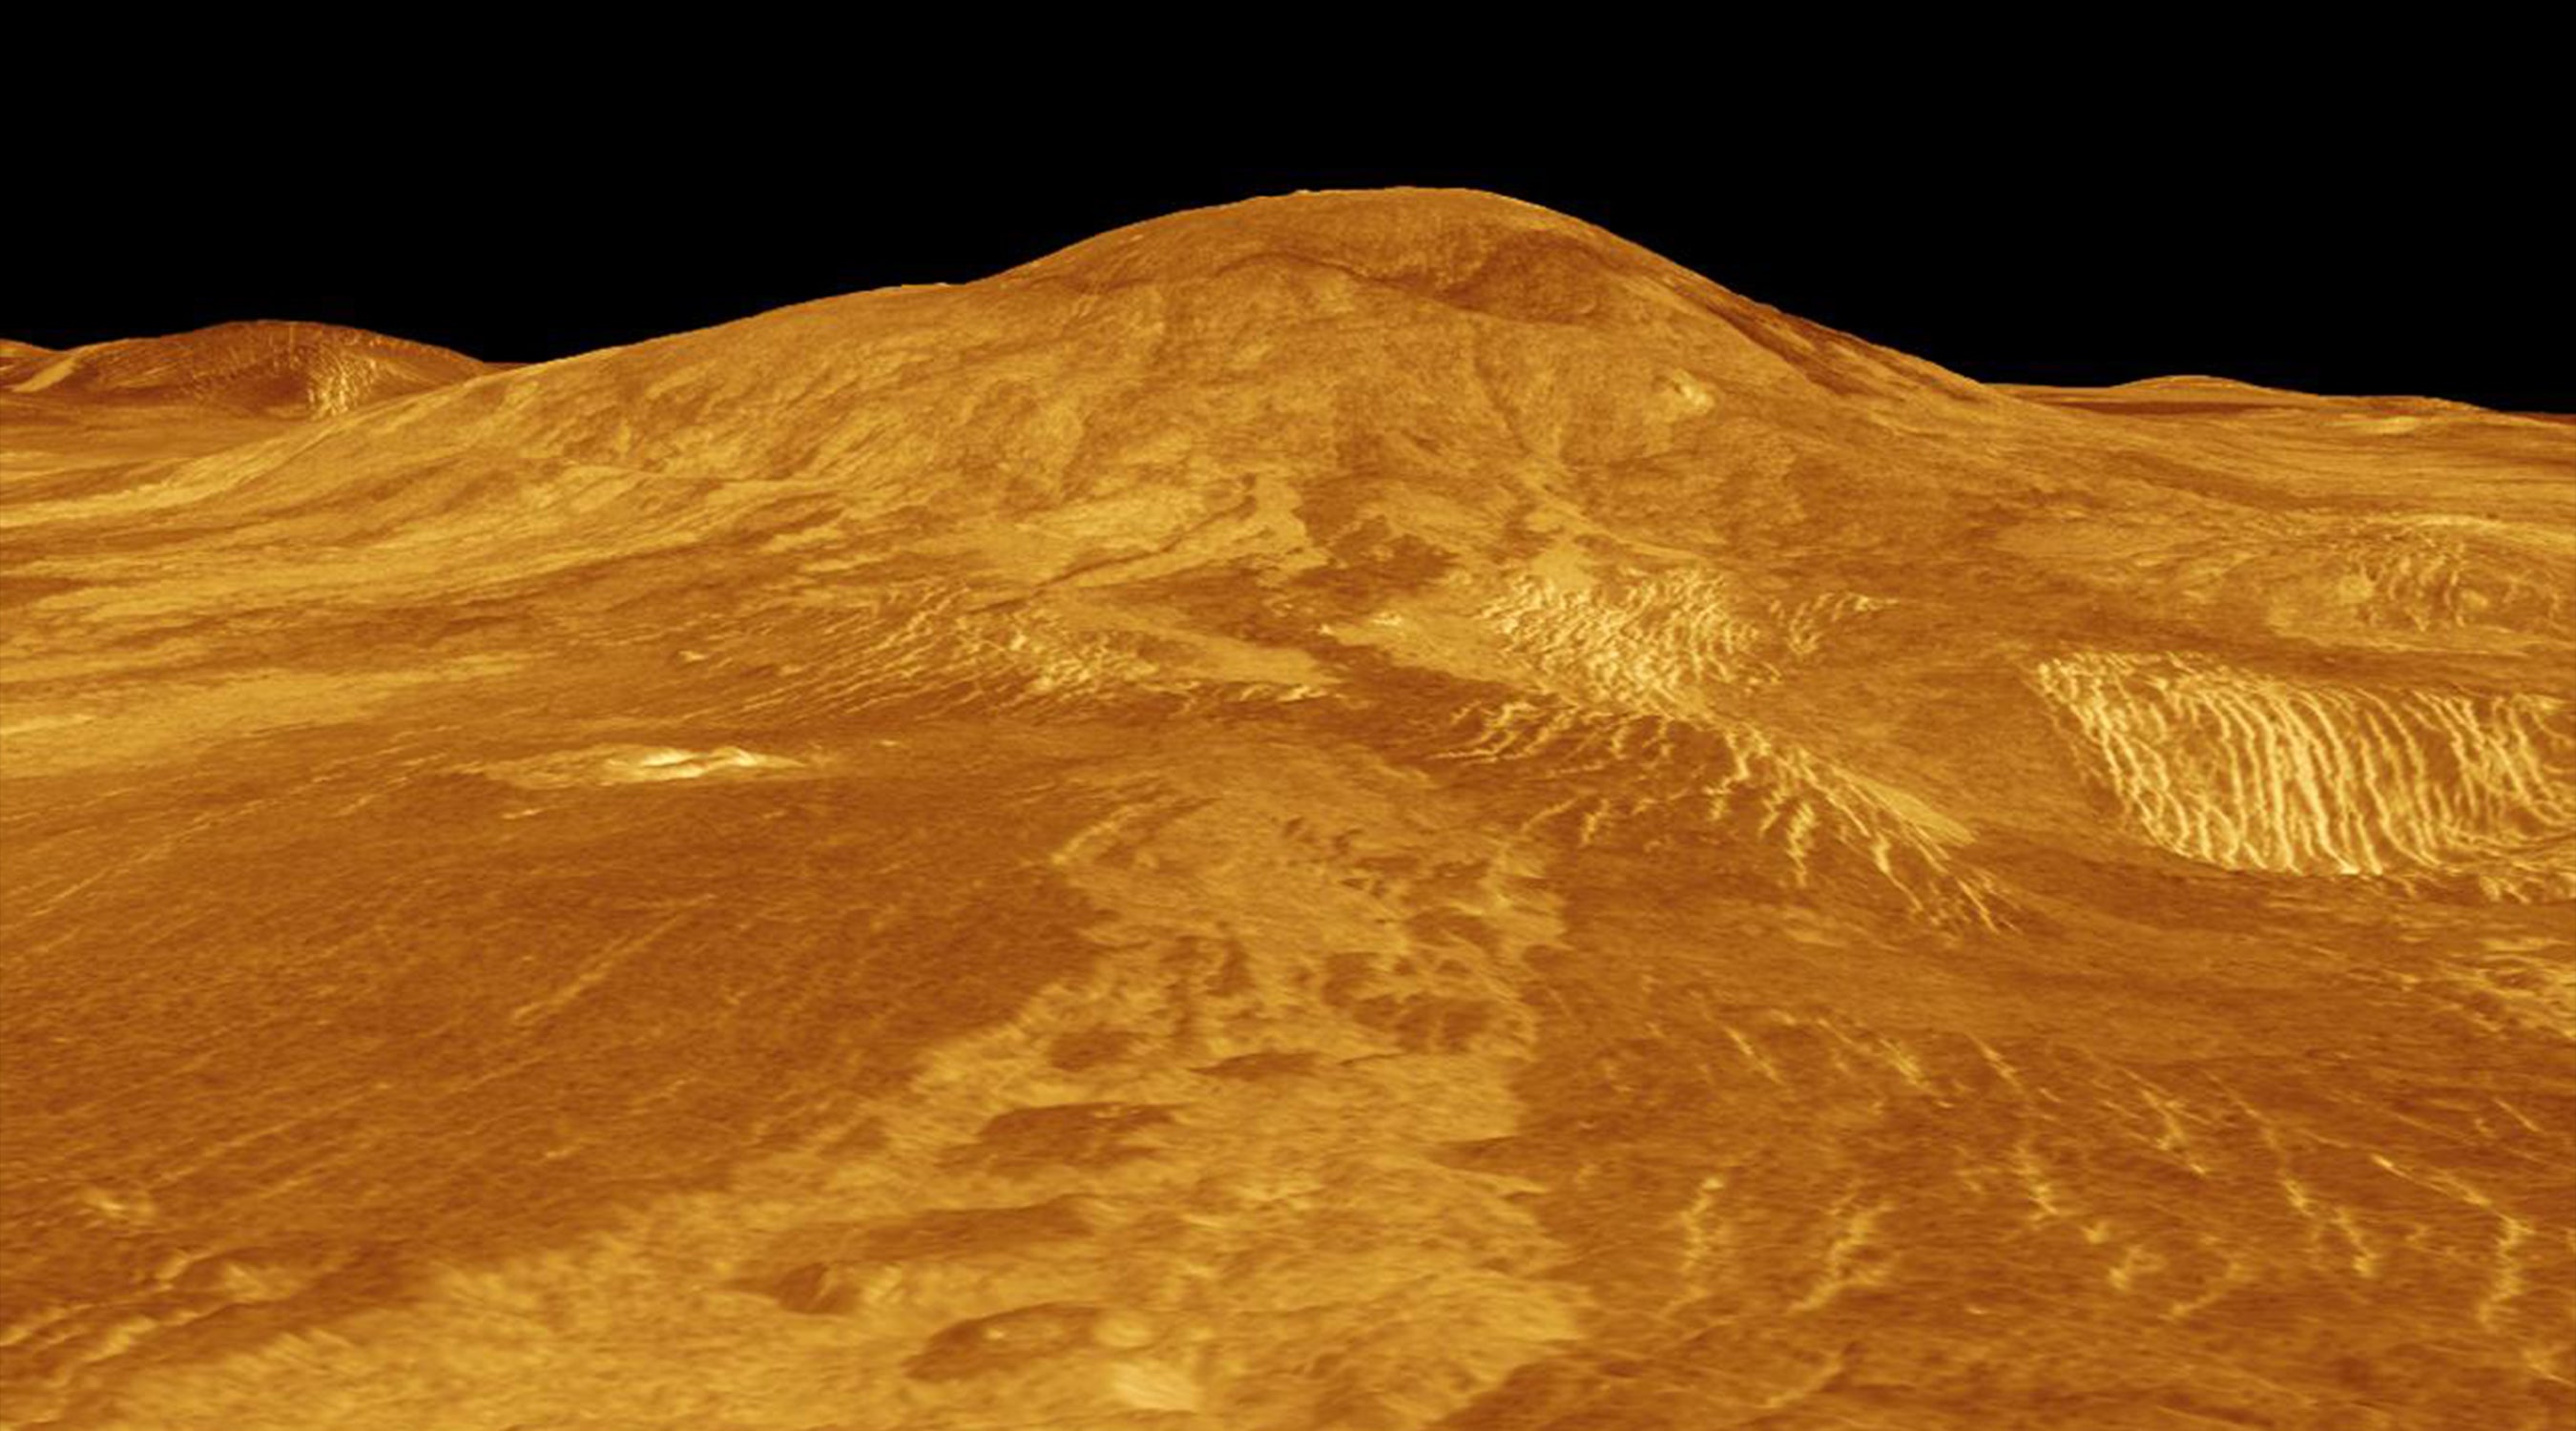 This computer-generated 3D model of Venus’ surface shows the volcano Sif Mons, which is exhibiting signs of ongoing activity.